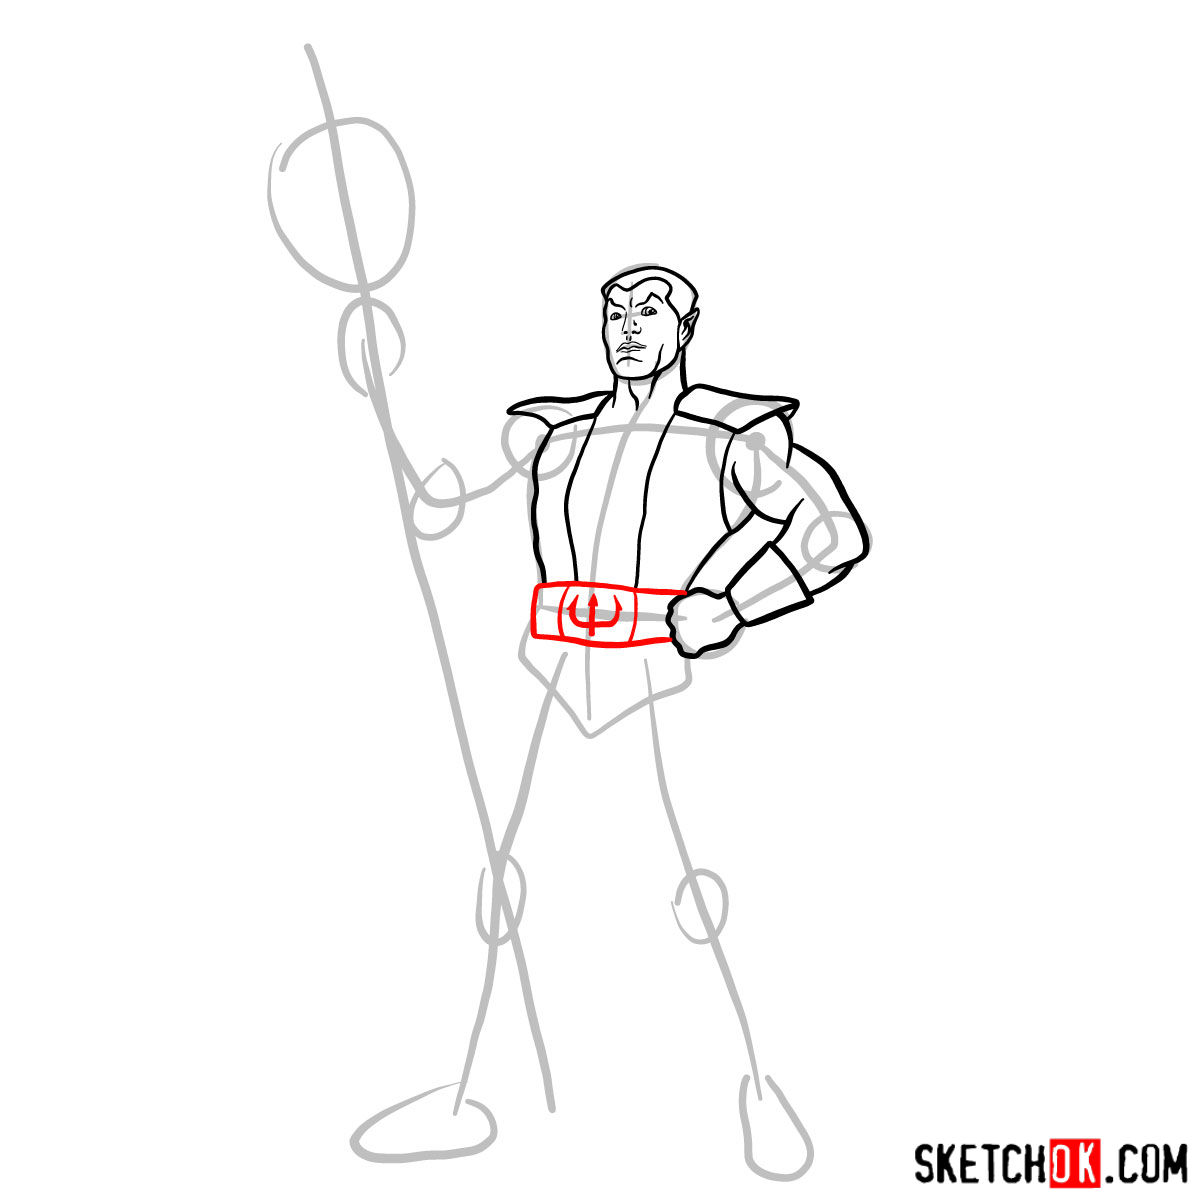 How to draw Namor the Sub-Mariner from Marvel Comics - step 08